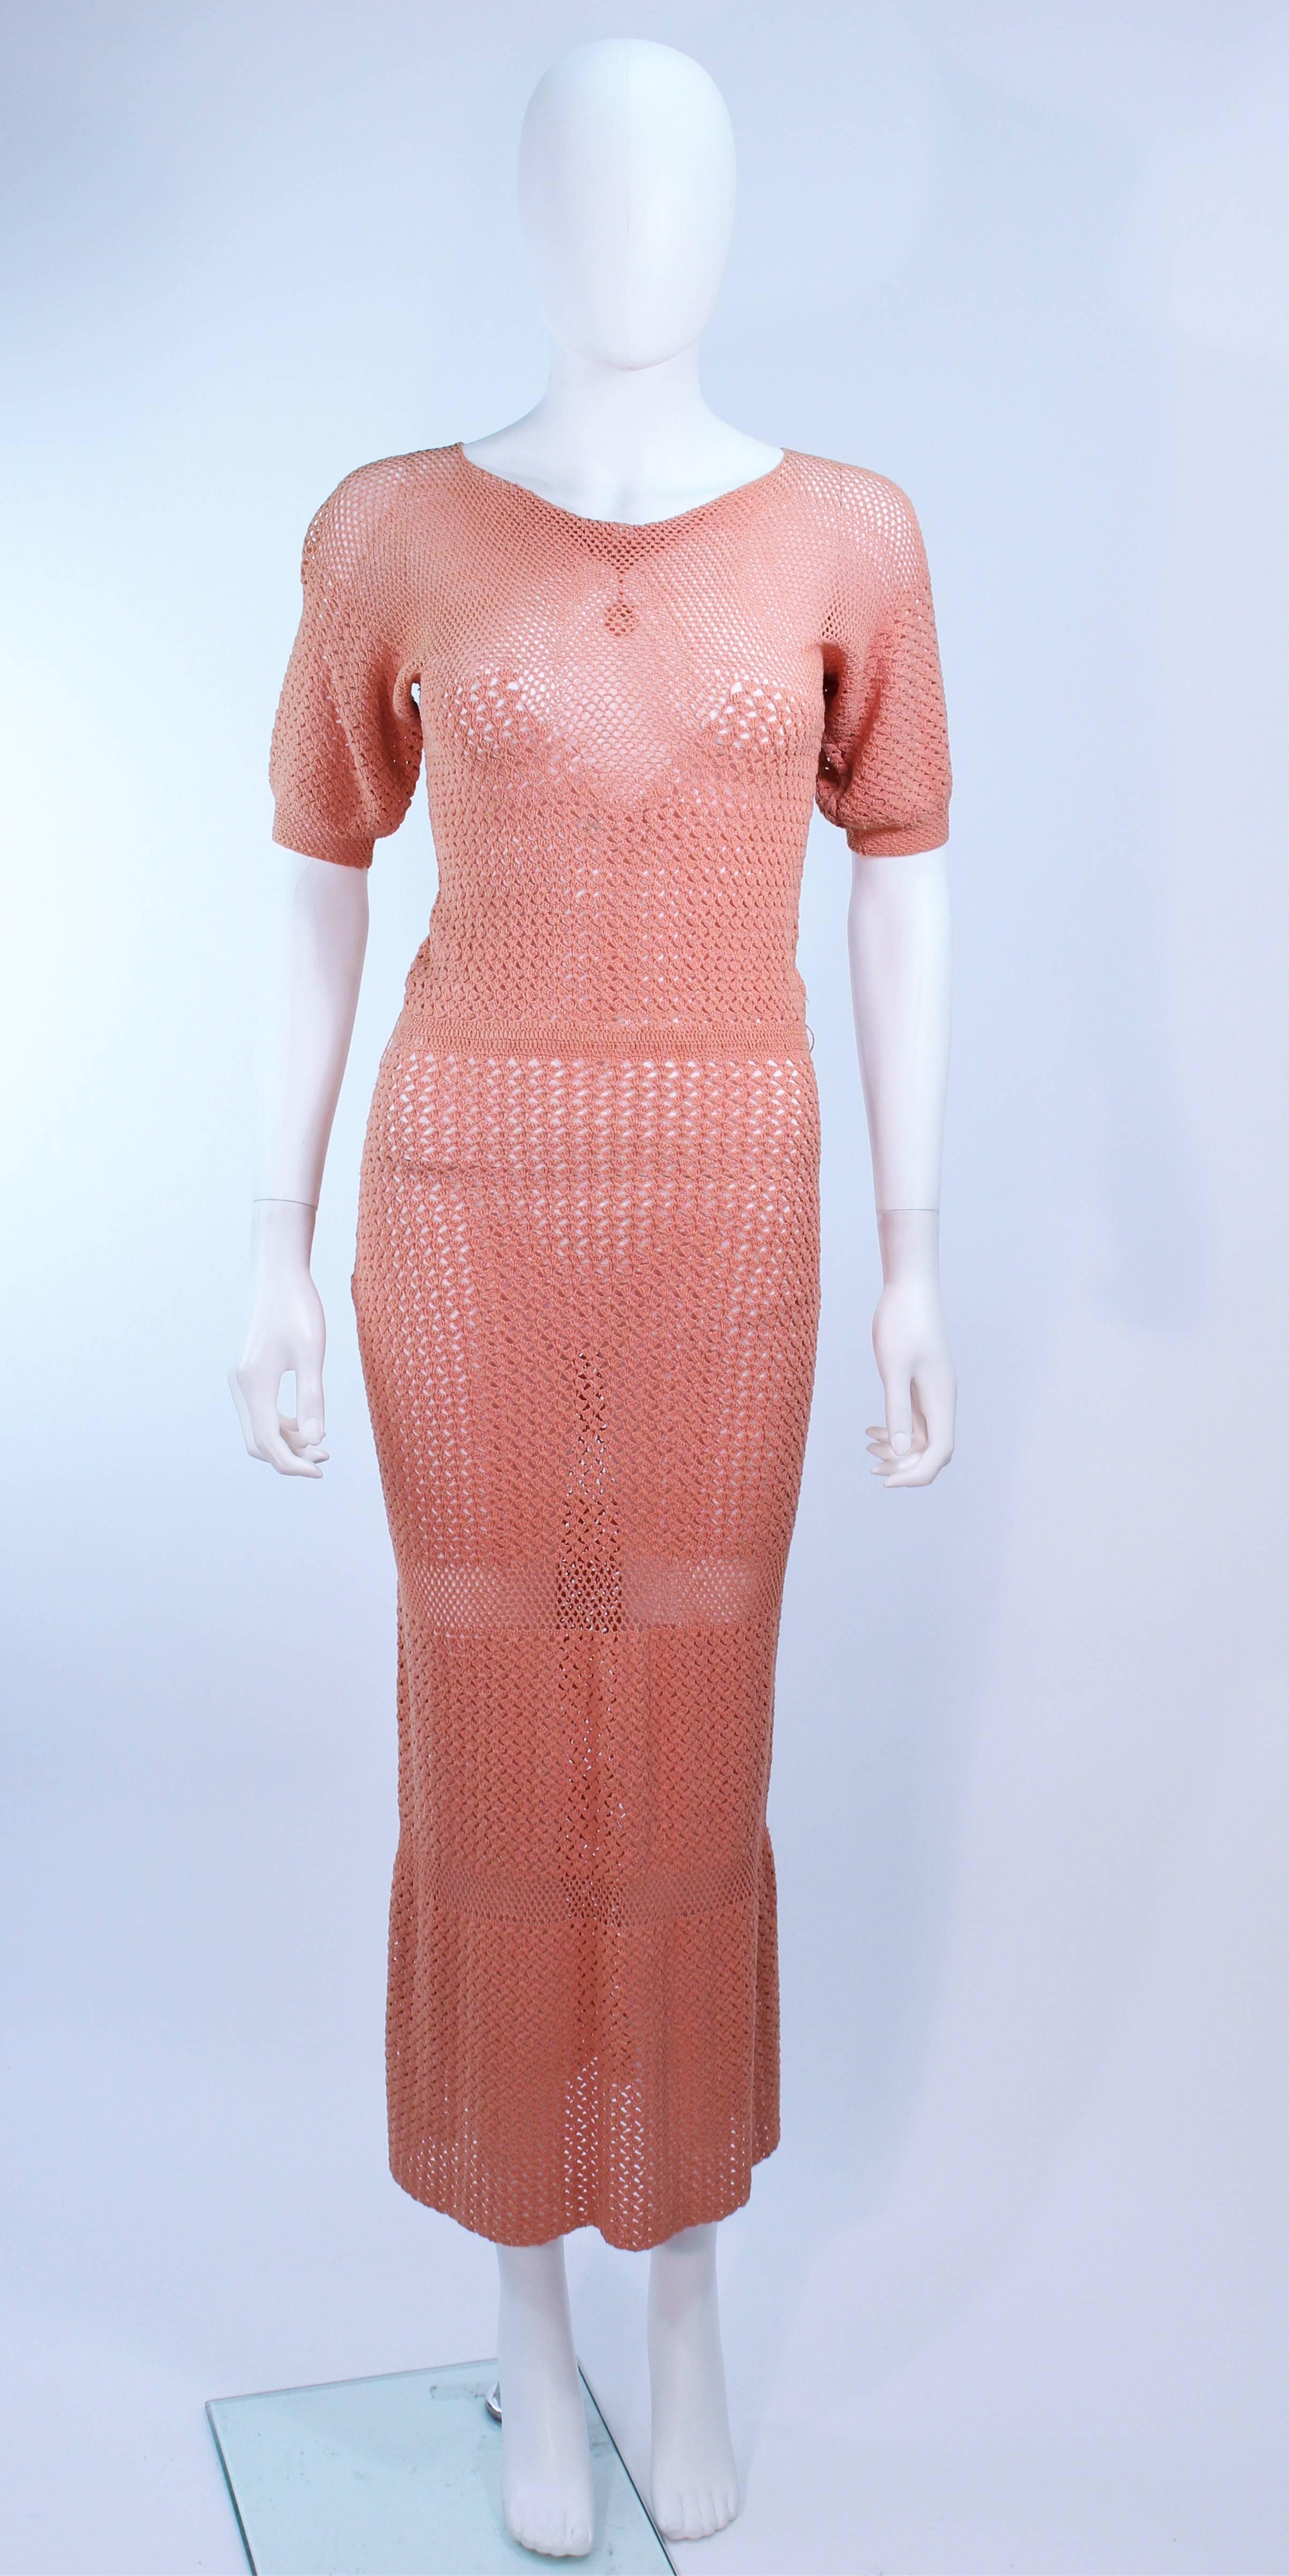 This gown is composed of a terracotta hue knit. Features a draped neckline and tea length. In excellent condition.

**Please cross-reference measurements for personal accuracy. Size in description box is an estimation.

Measures